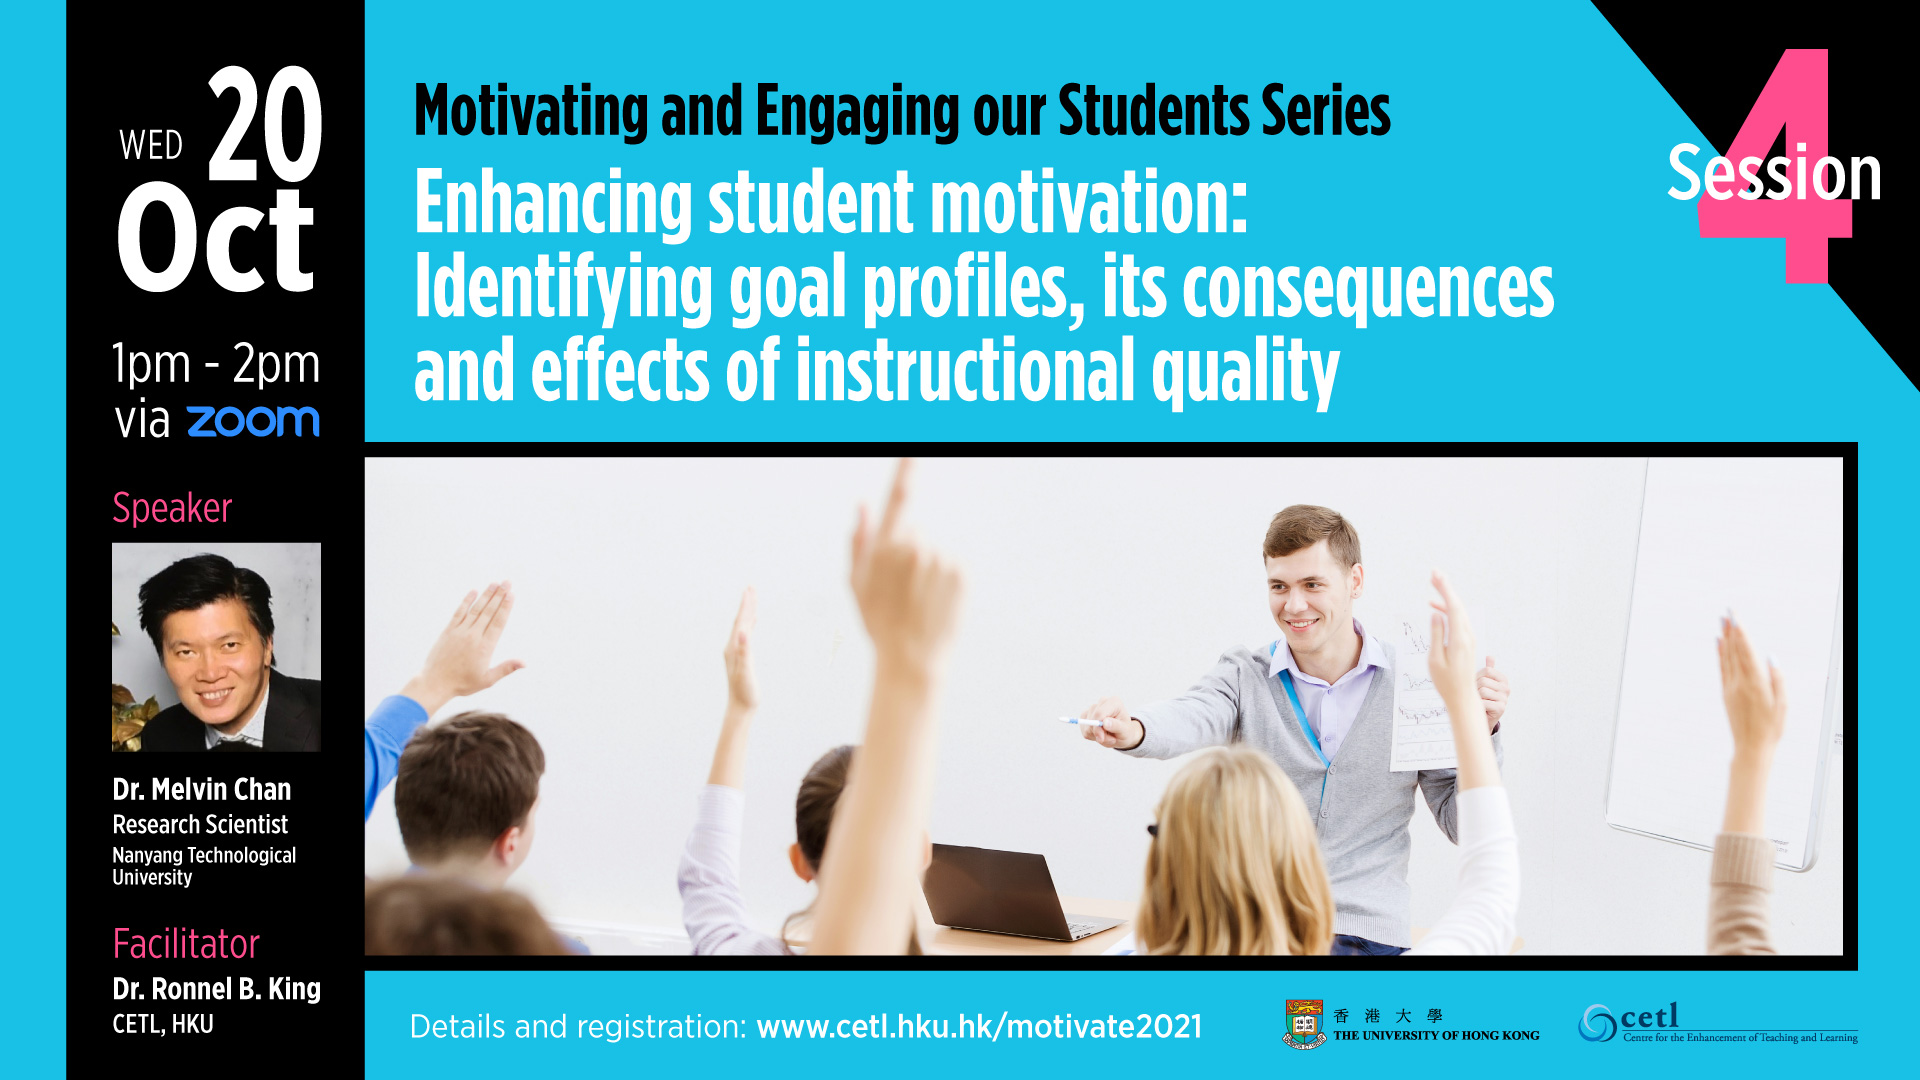 Session 4: Enhancing student motivation: Identifying goal profiles, its consequences and effects of instructional quality